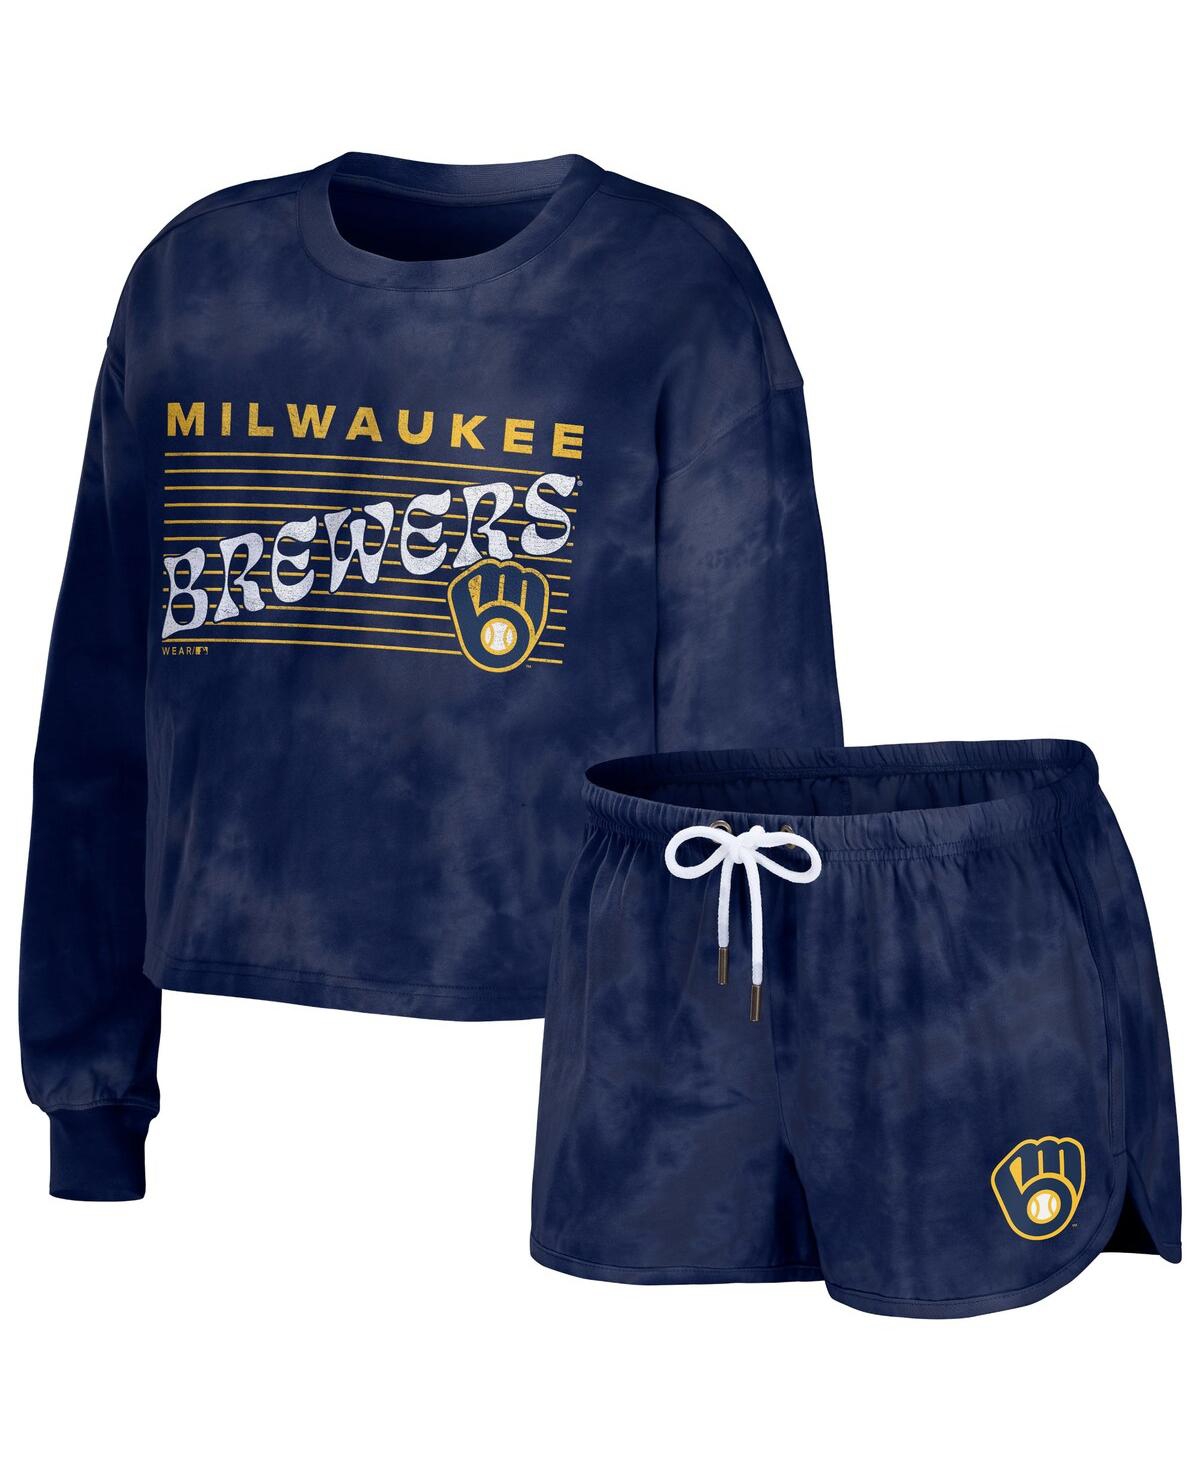 Shop Wear By Erin Andrews Women's  Navy Milwaukee Brewers Tie-dye Cropped Pullover Sweatshirt And Shorts L